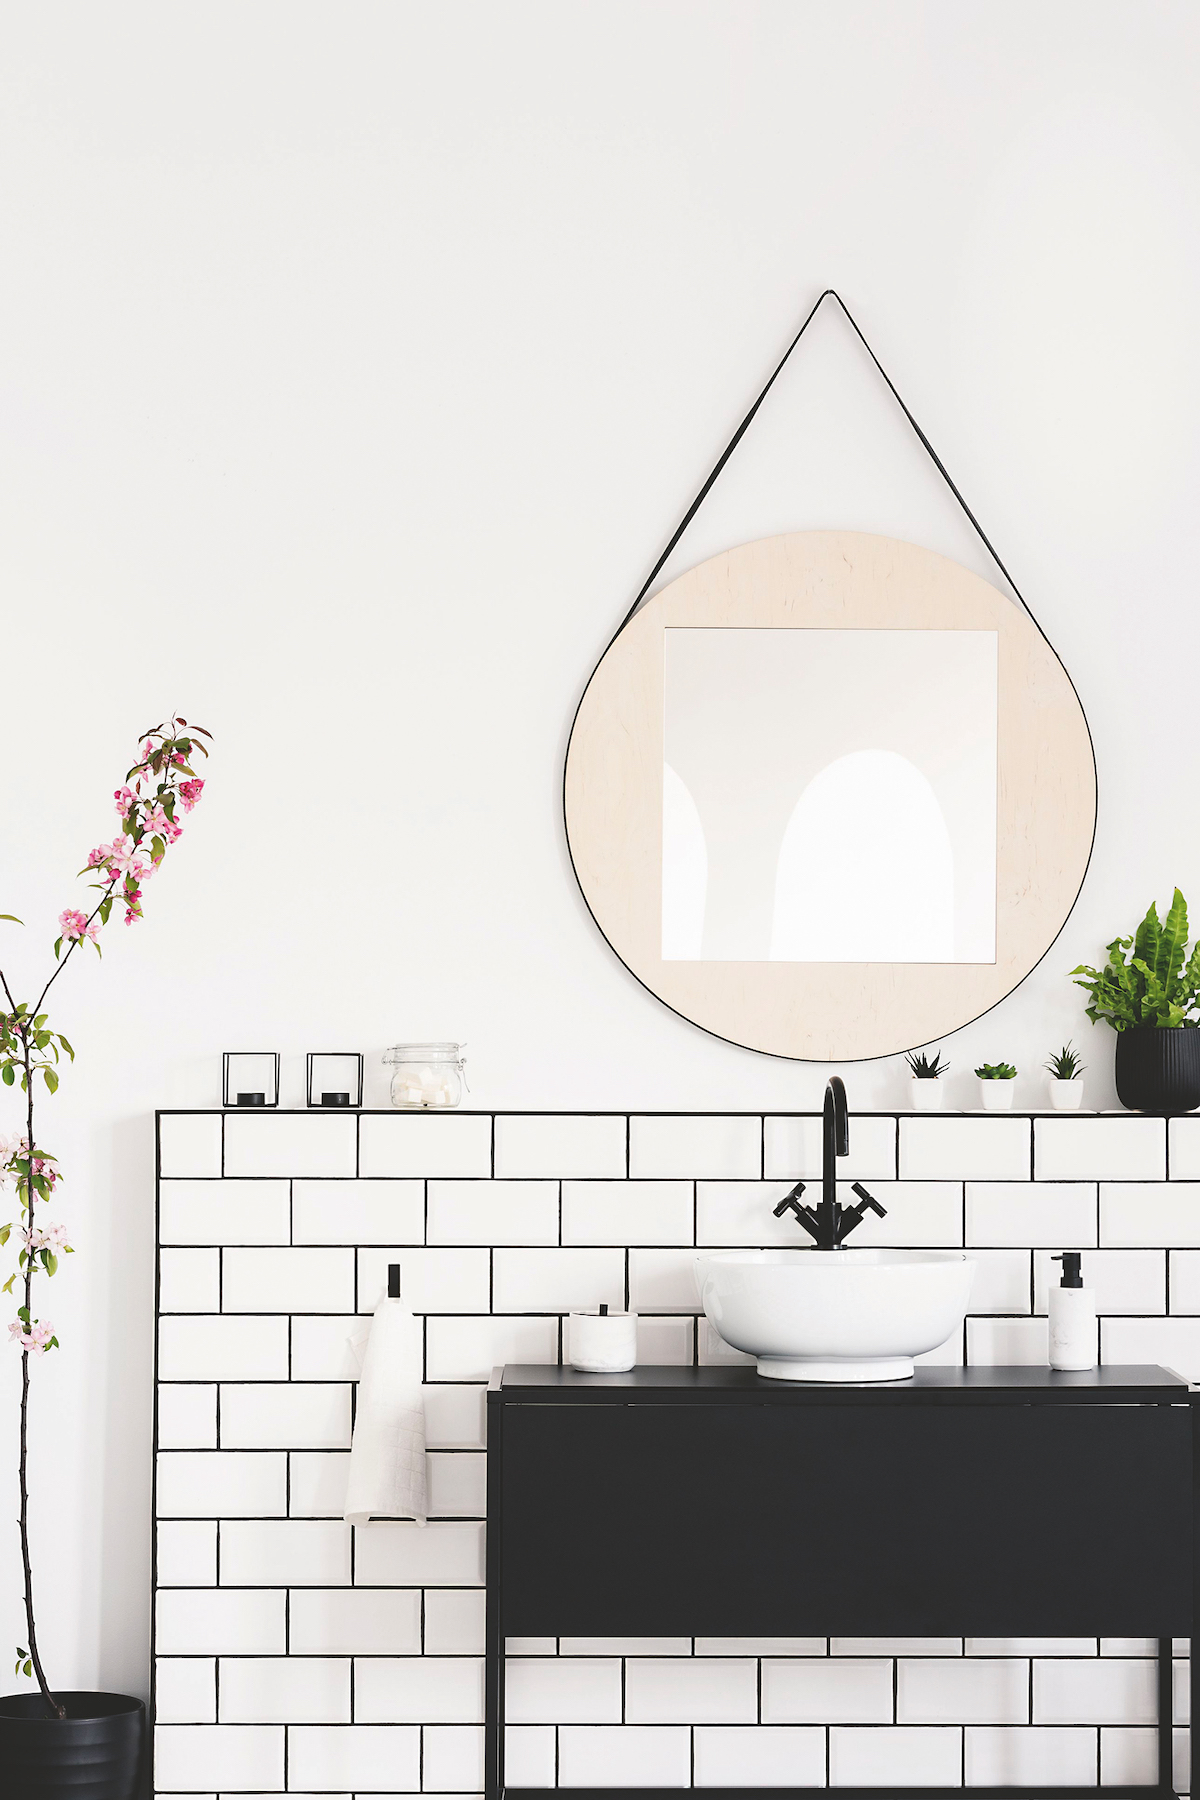 Real photo of a black cupboard, round mirror and white tiles in a modern bathroom interior